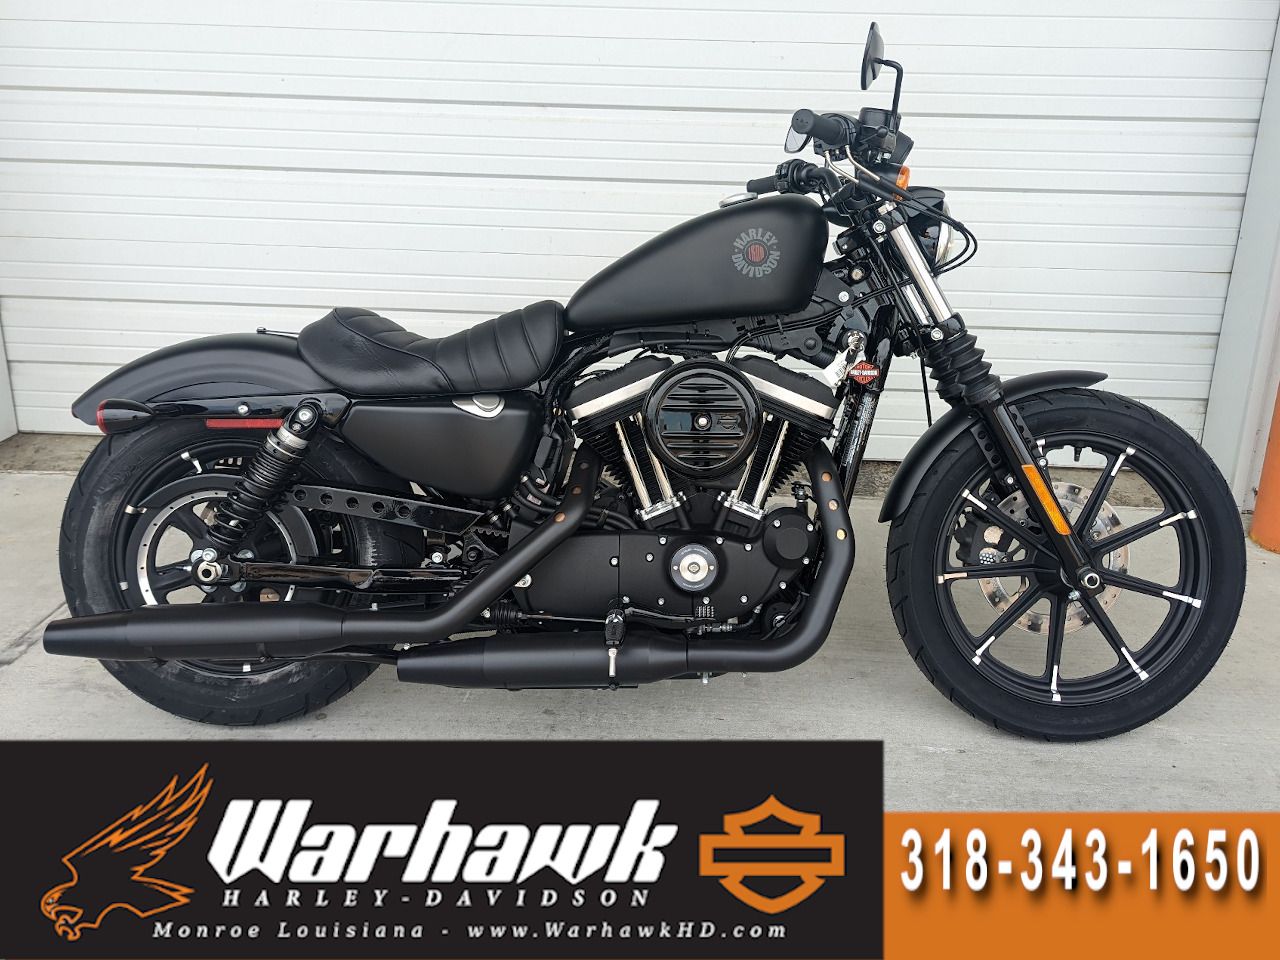 new 2022 harley-davidson sportster iron 883 for sale near me - Photo 1